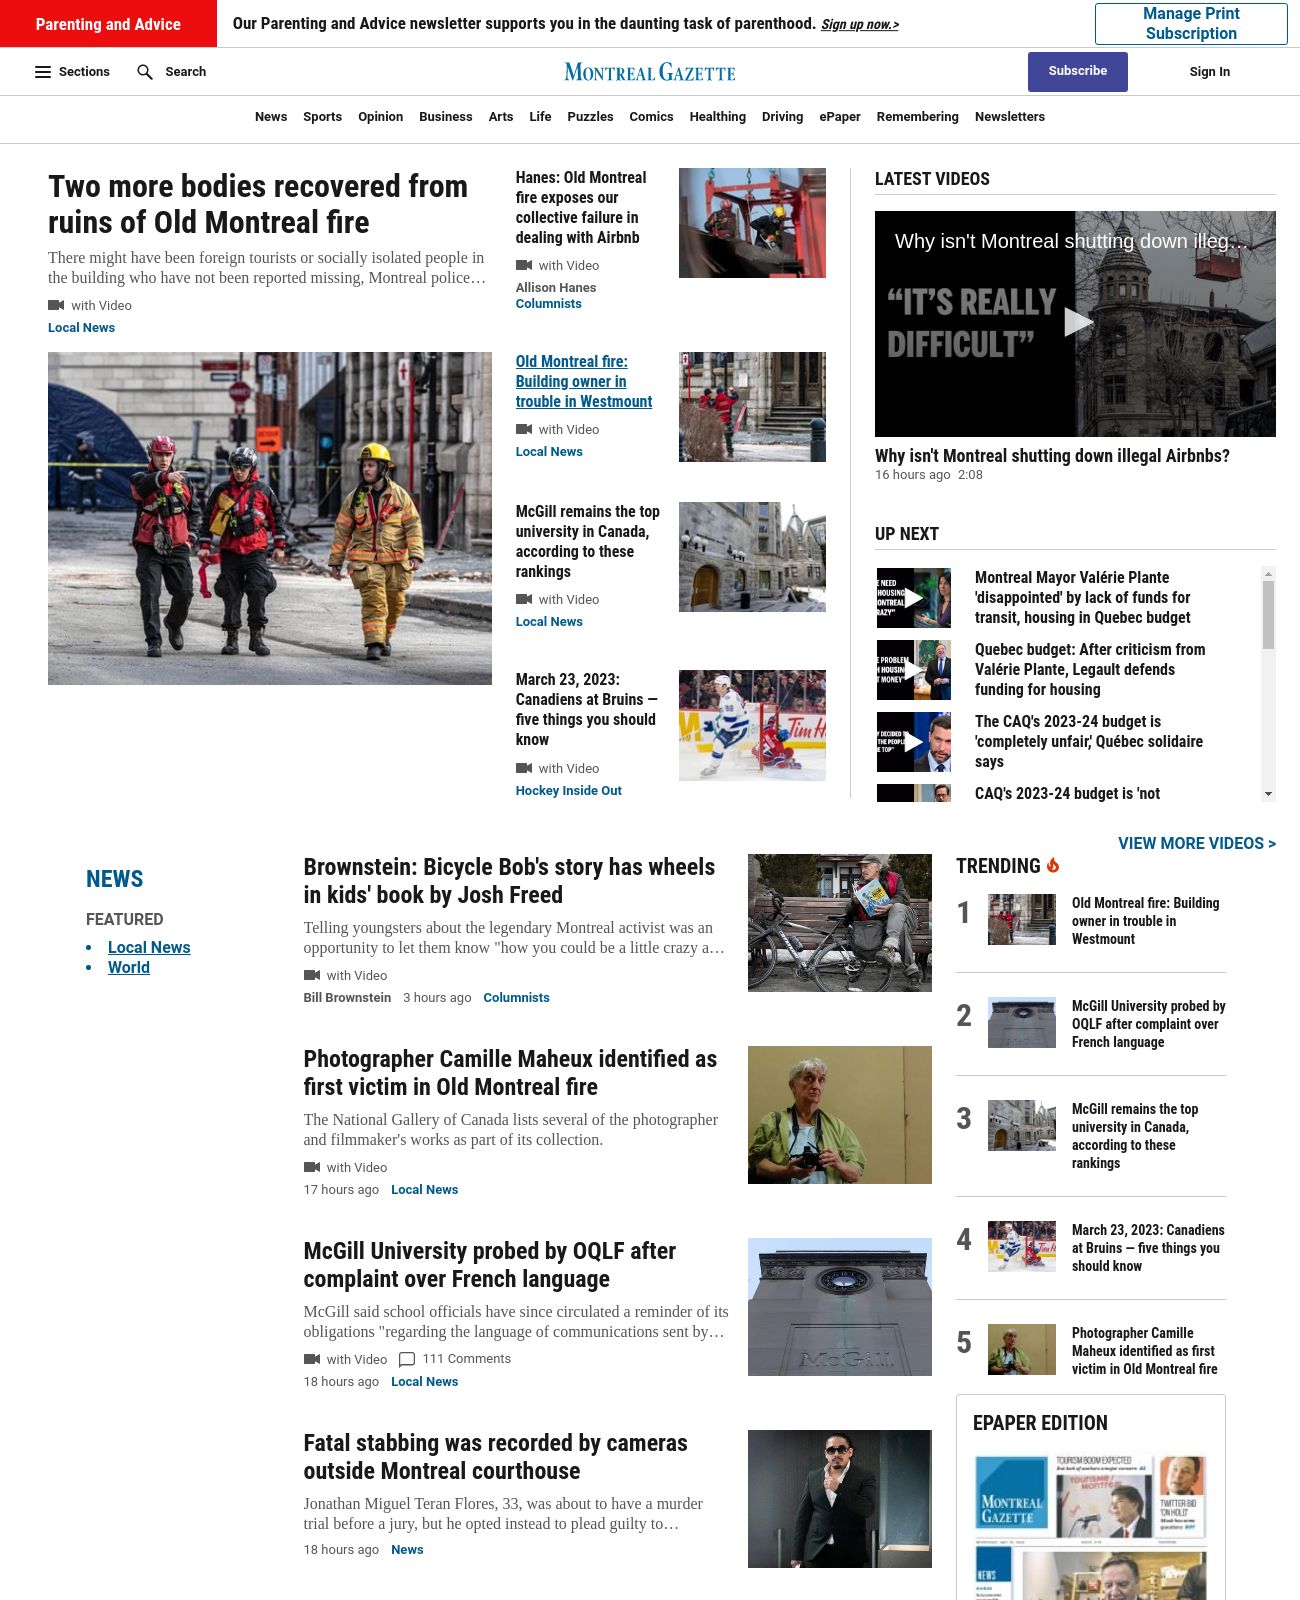 Montreal Gazette at 2023-03-23 10:01:48-04:00 local time